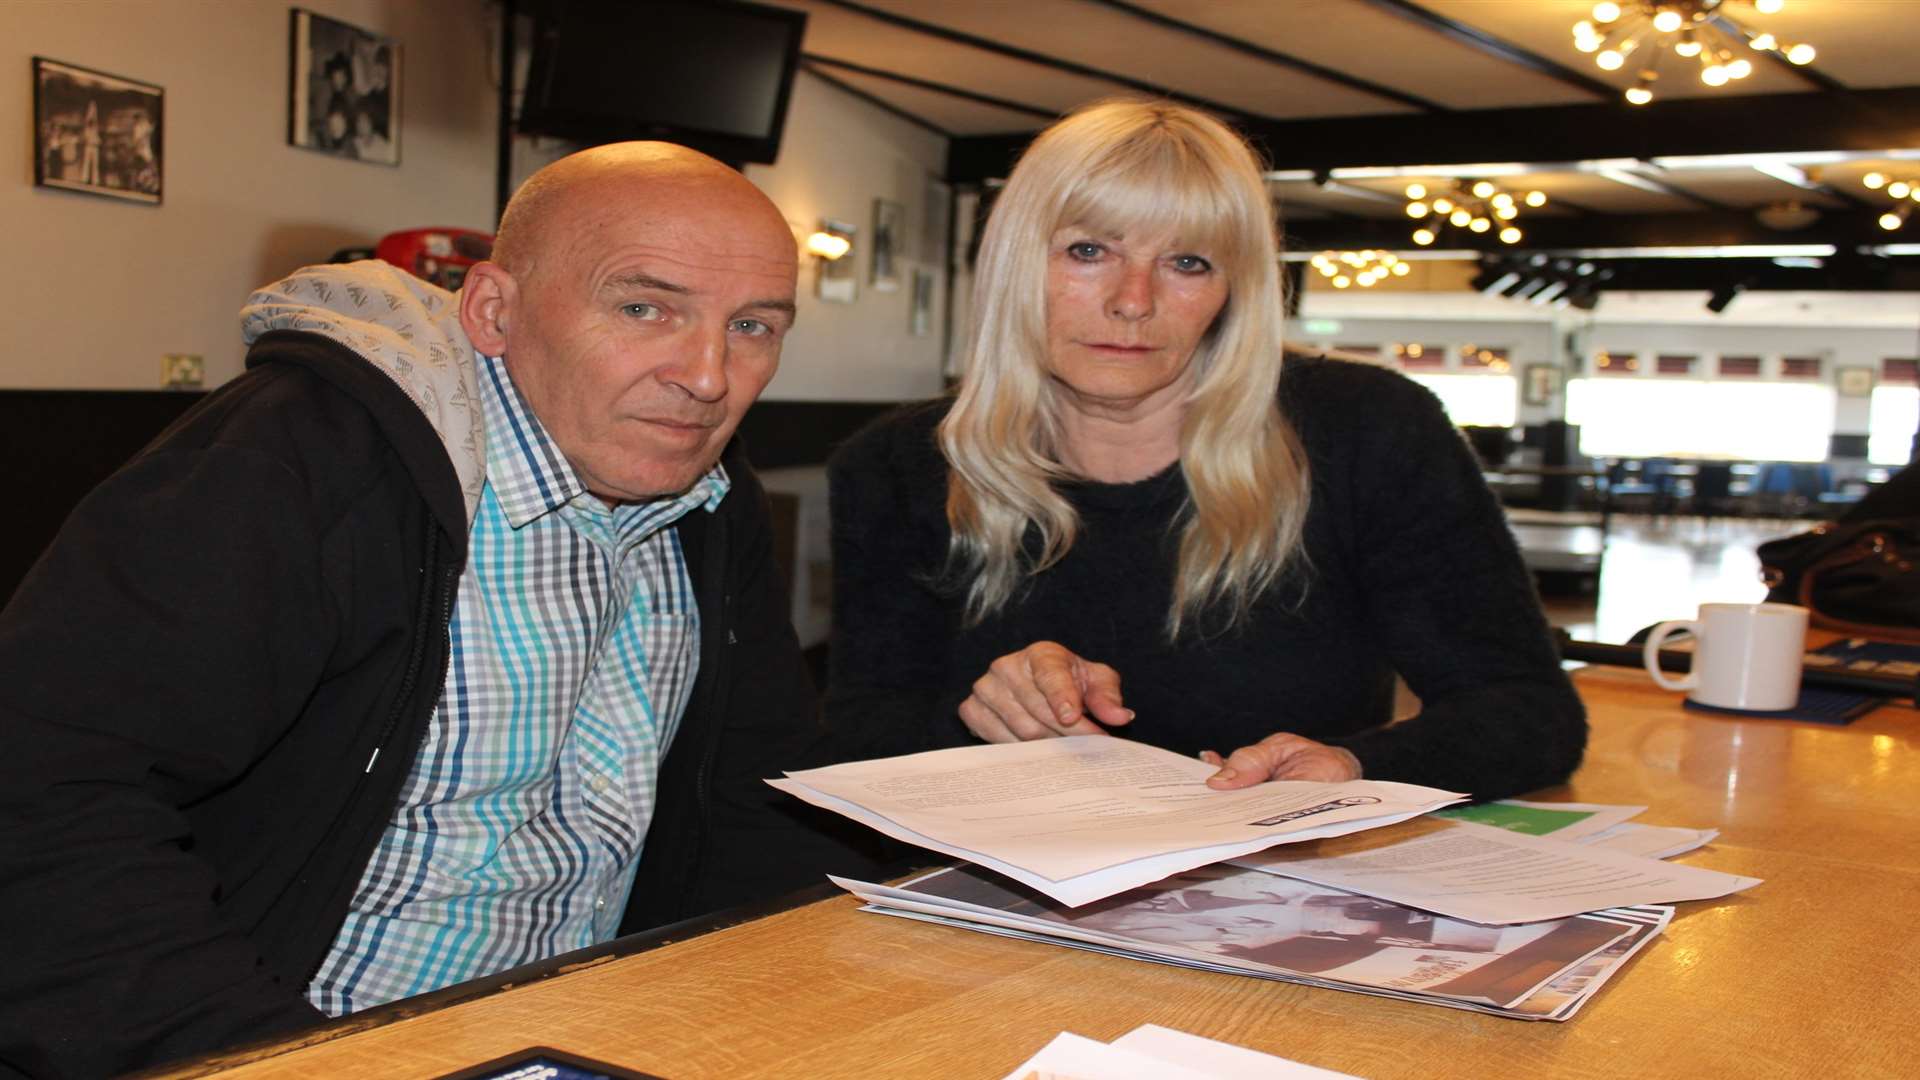 Landlords Chris and Jackie Prime study the new conditions imposed on them